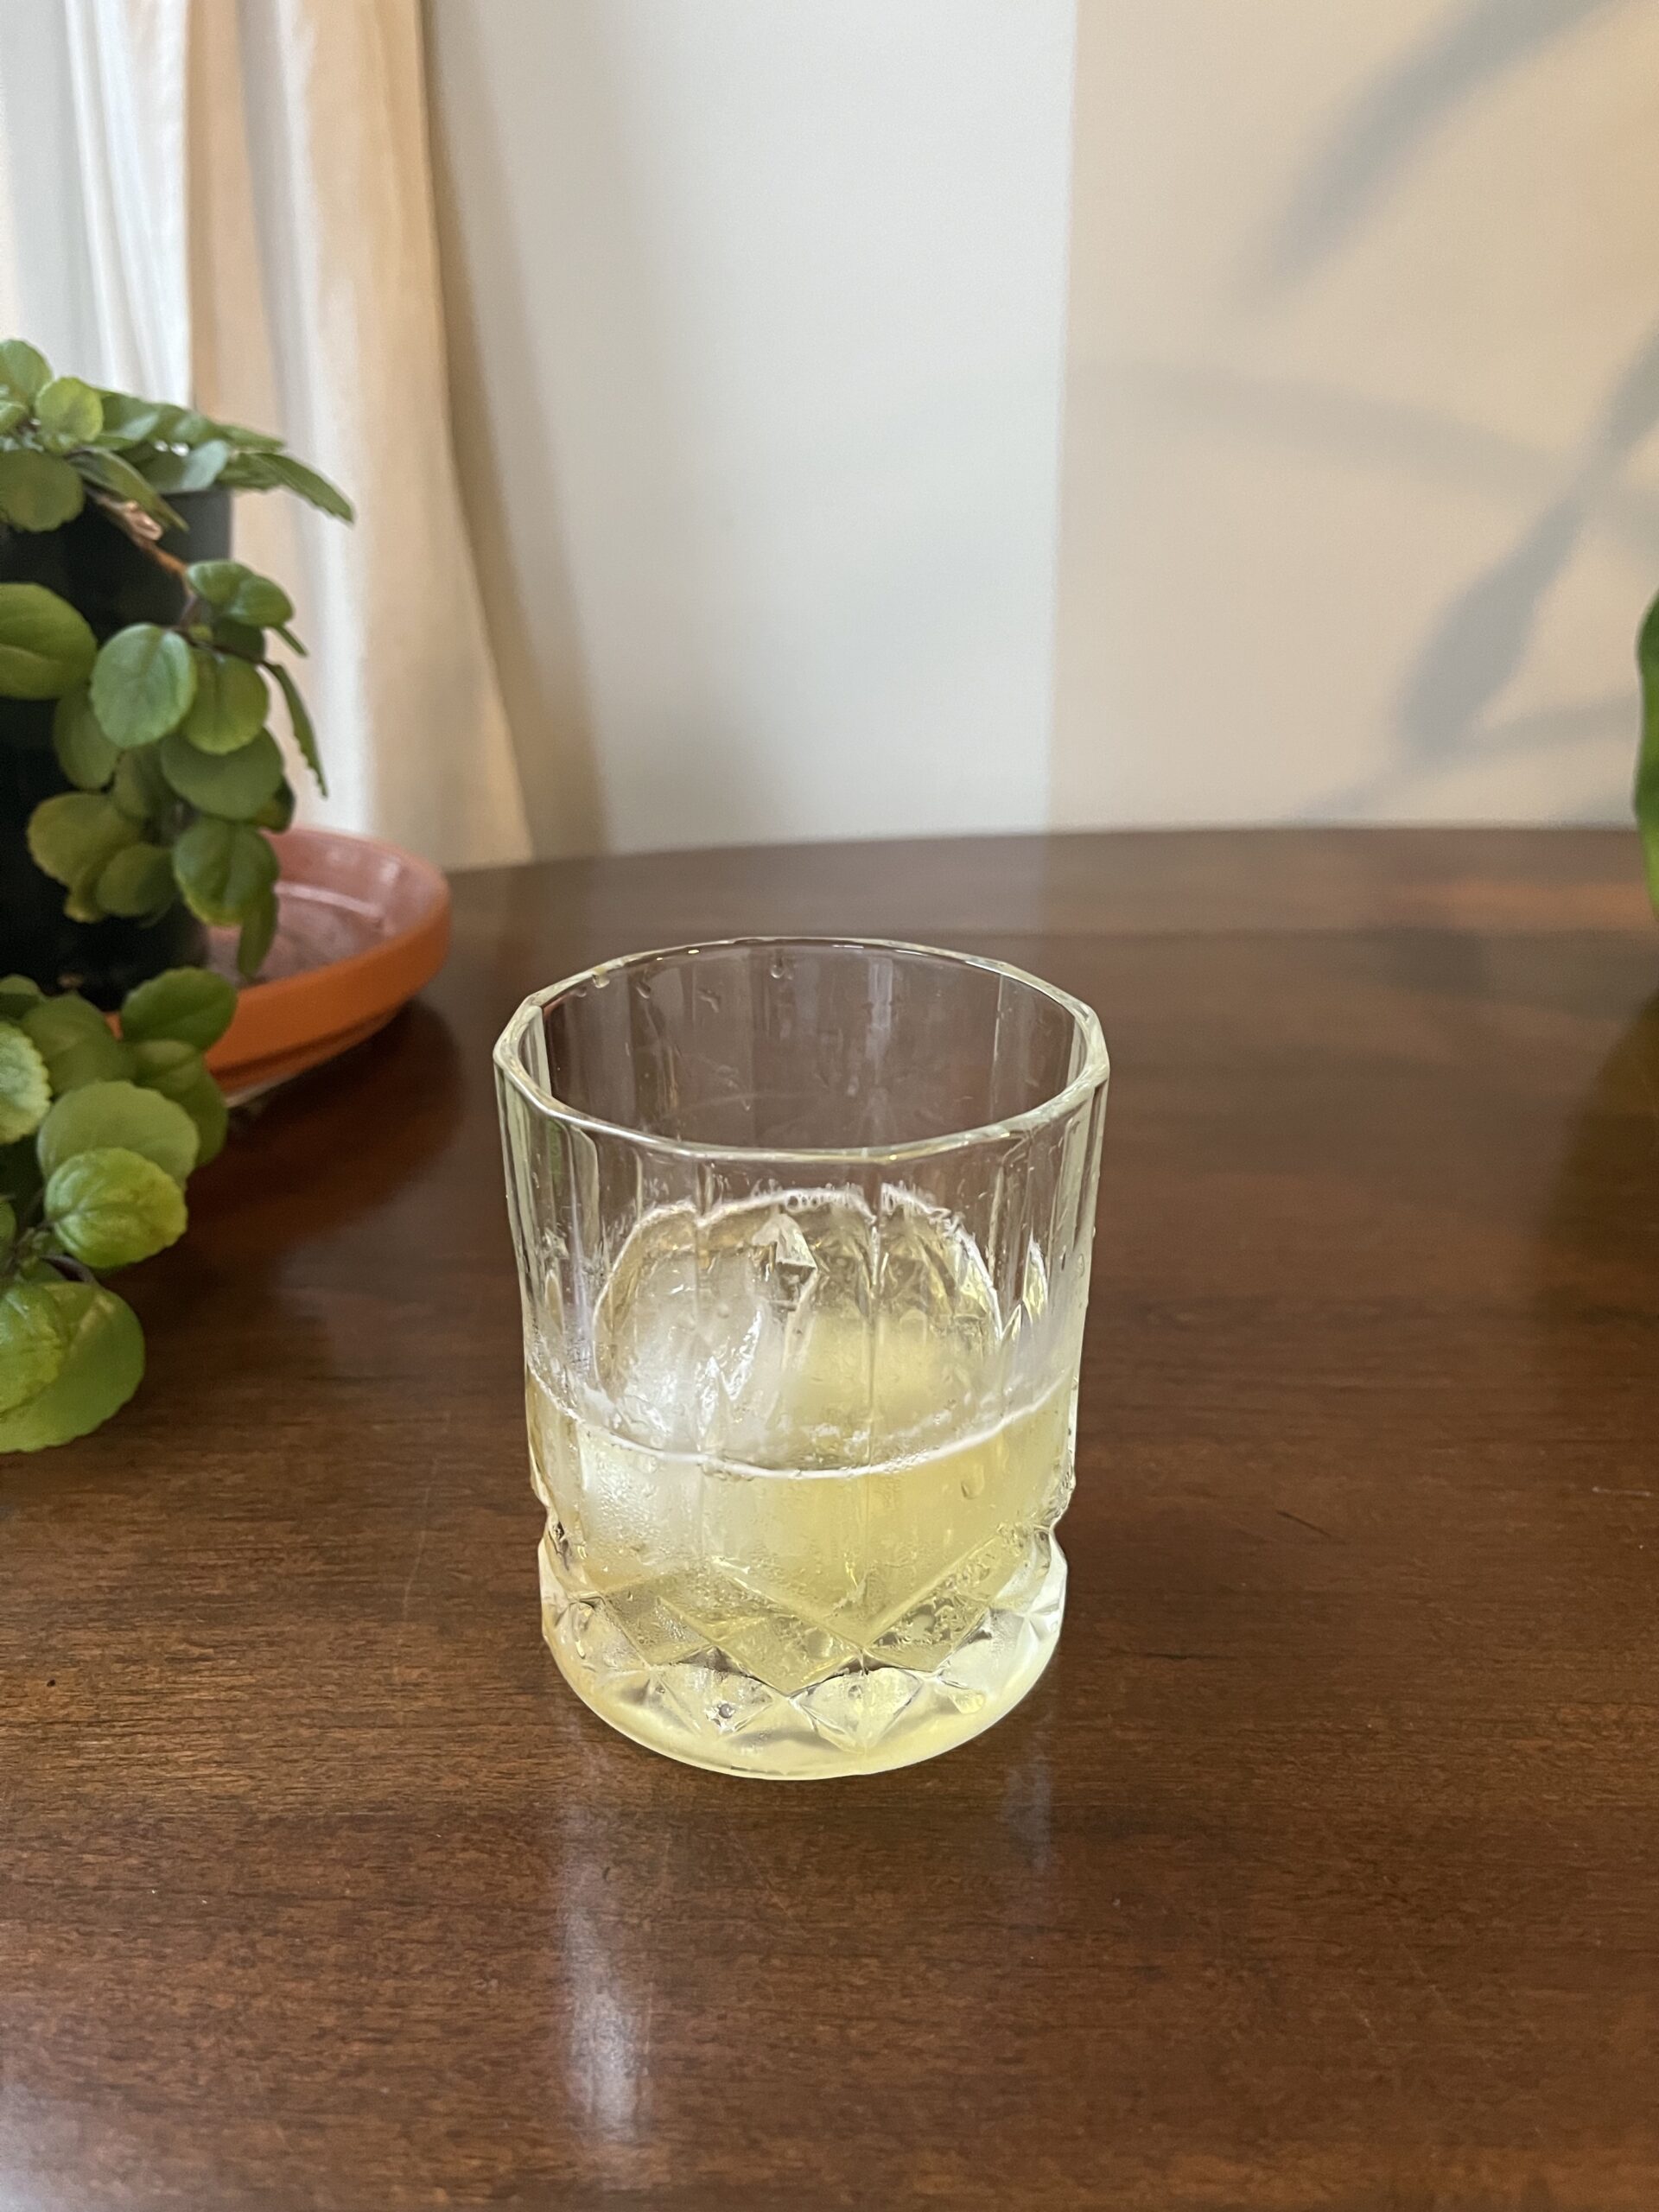 A clear glass with a yellow drink and a large ice sphere sits on a wooden table. Green potted plants are in the background.